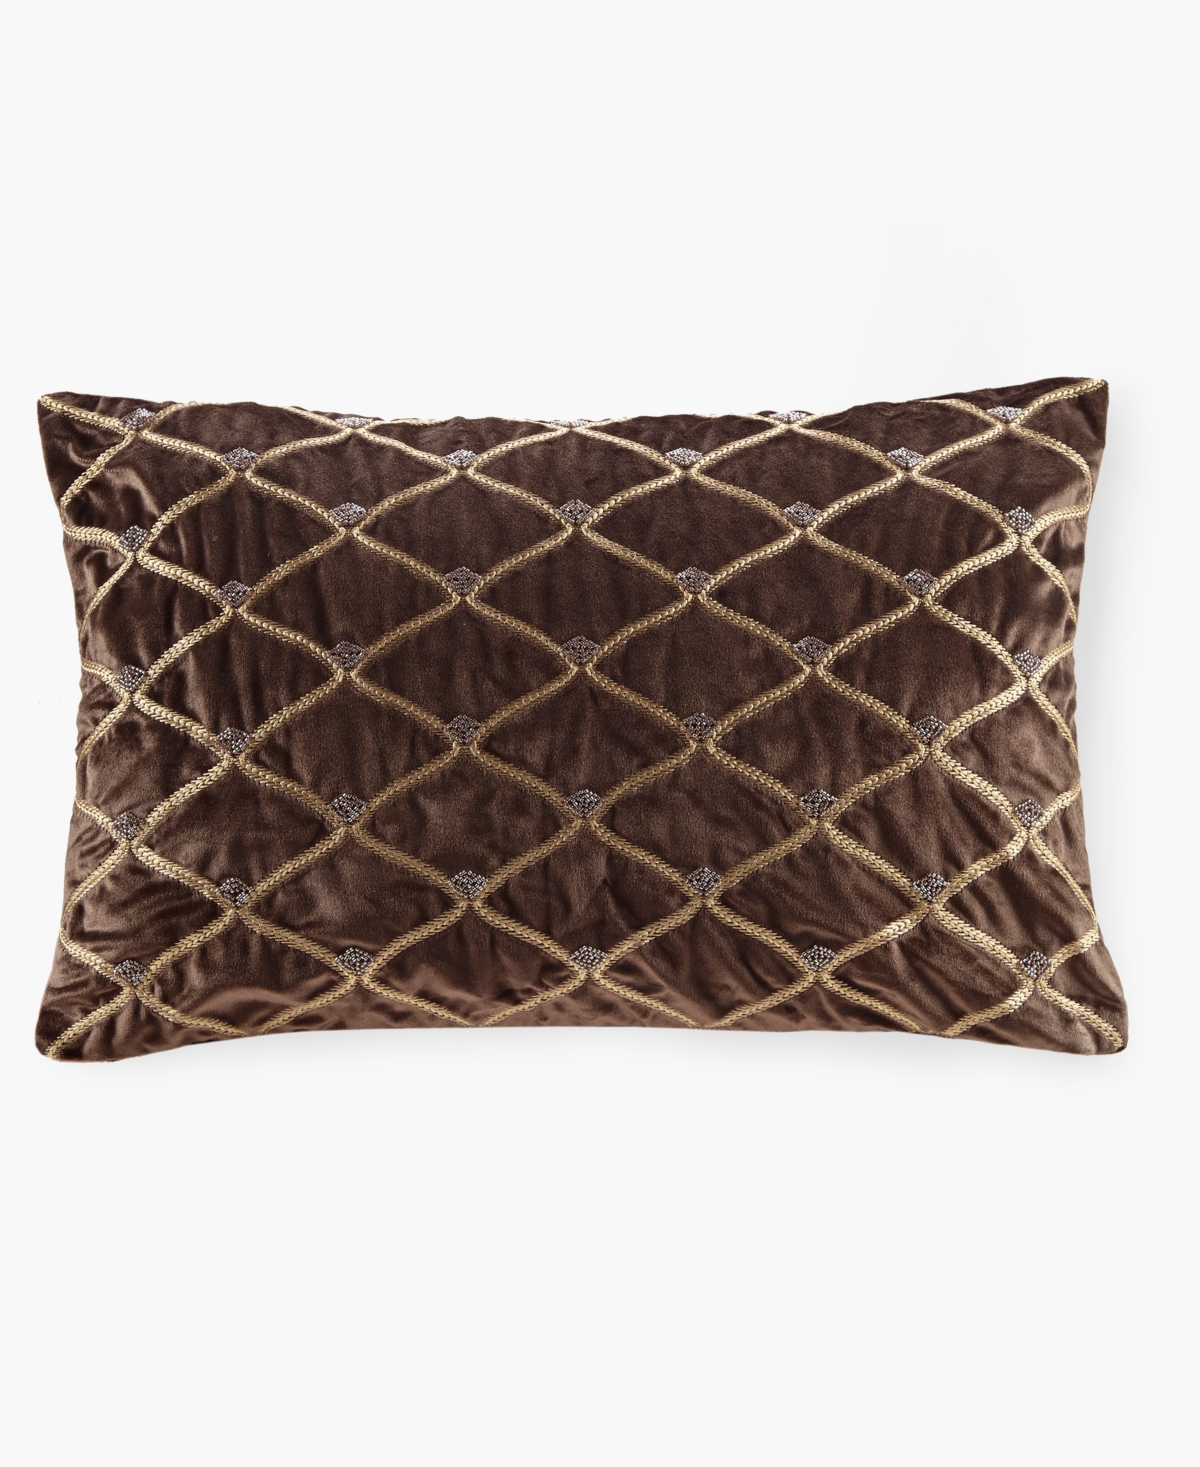 Croscill Aumont Oblong Decorative Pillow, 22" X 15" In Brown